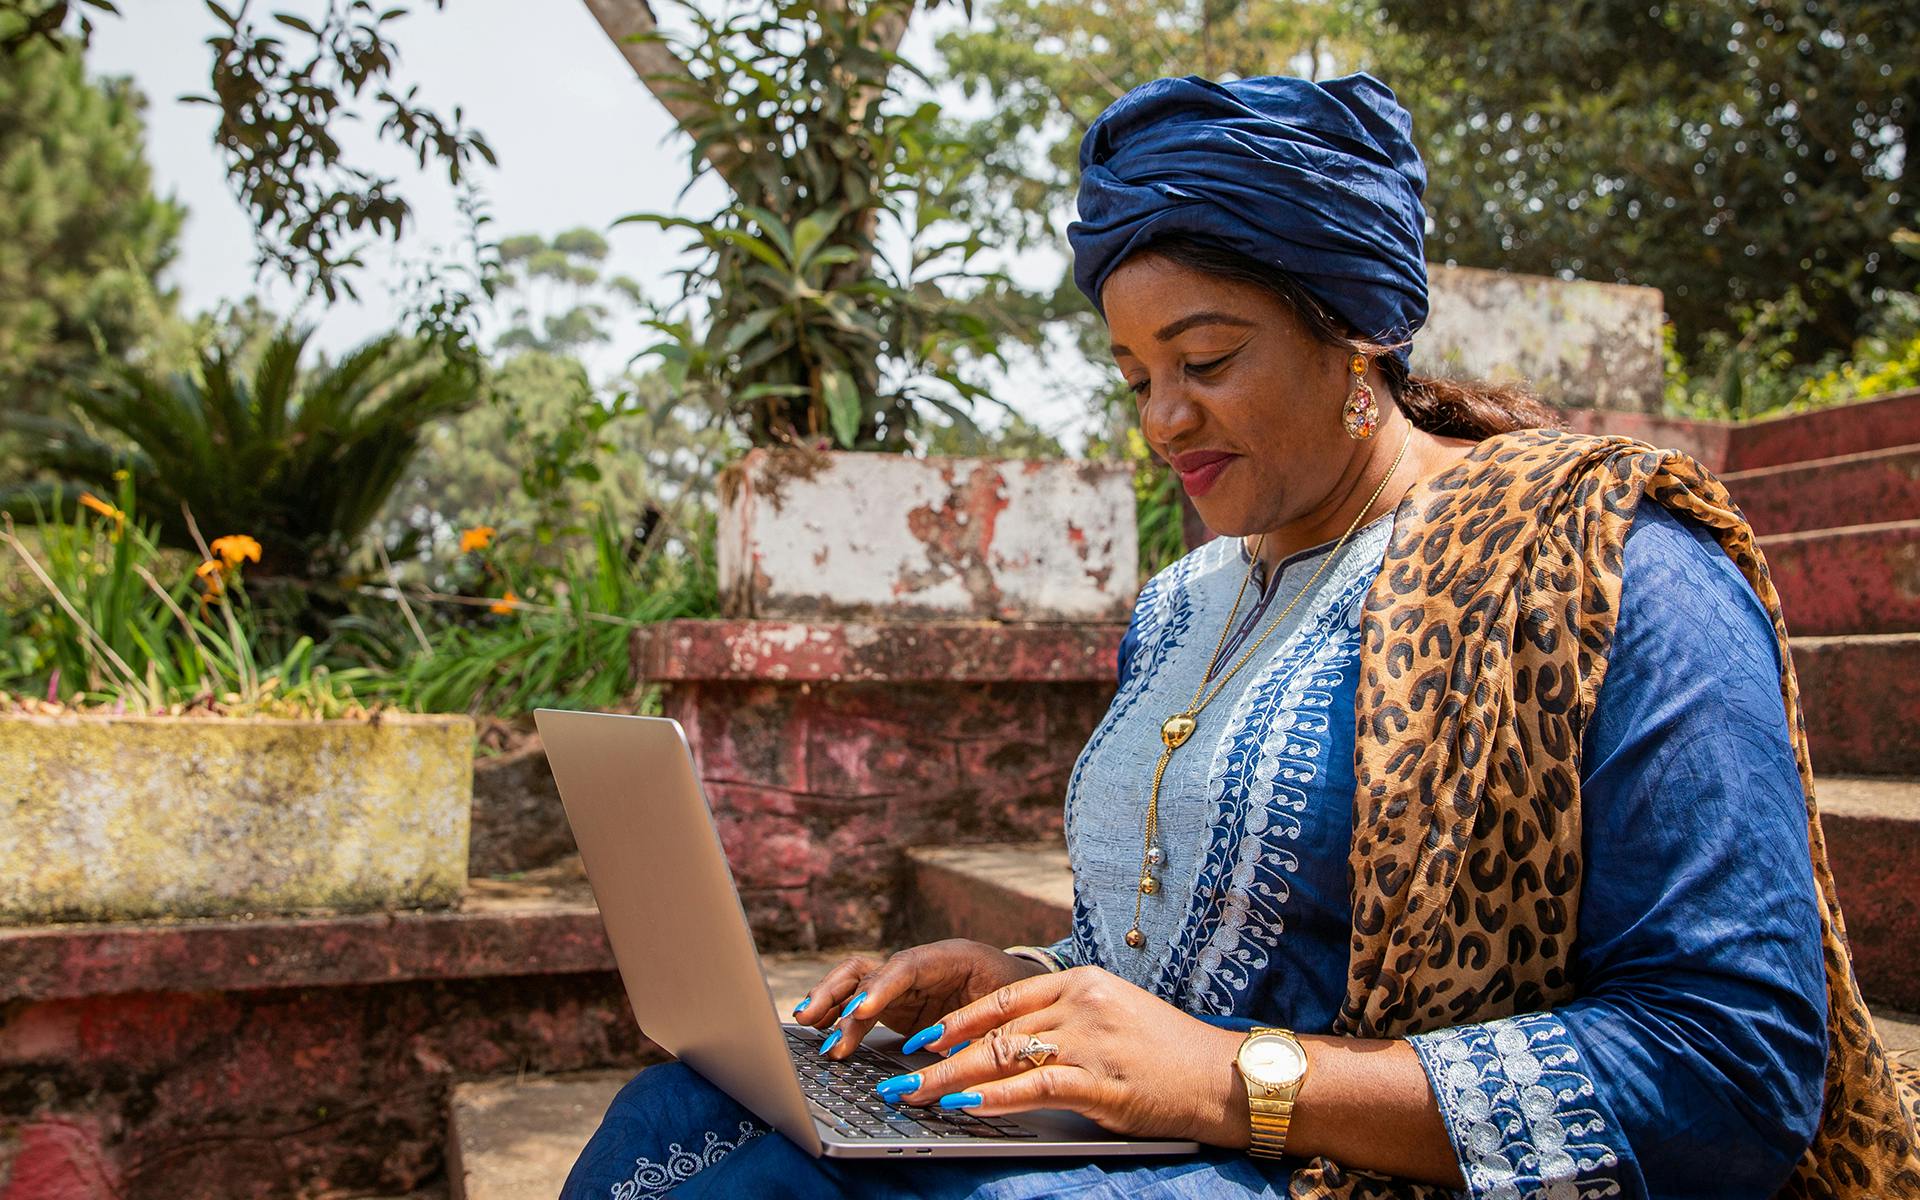 A middle-age African woman wearing a blue traditional dress and head wrap works on a computer.